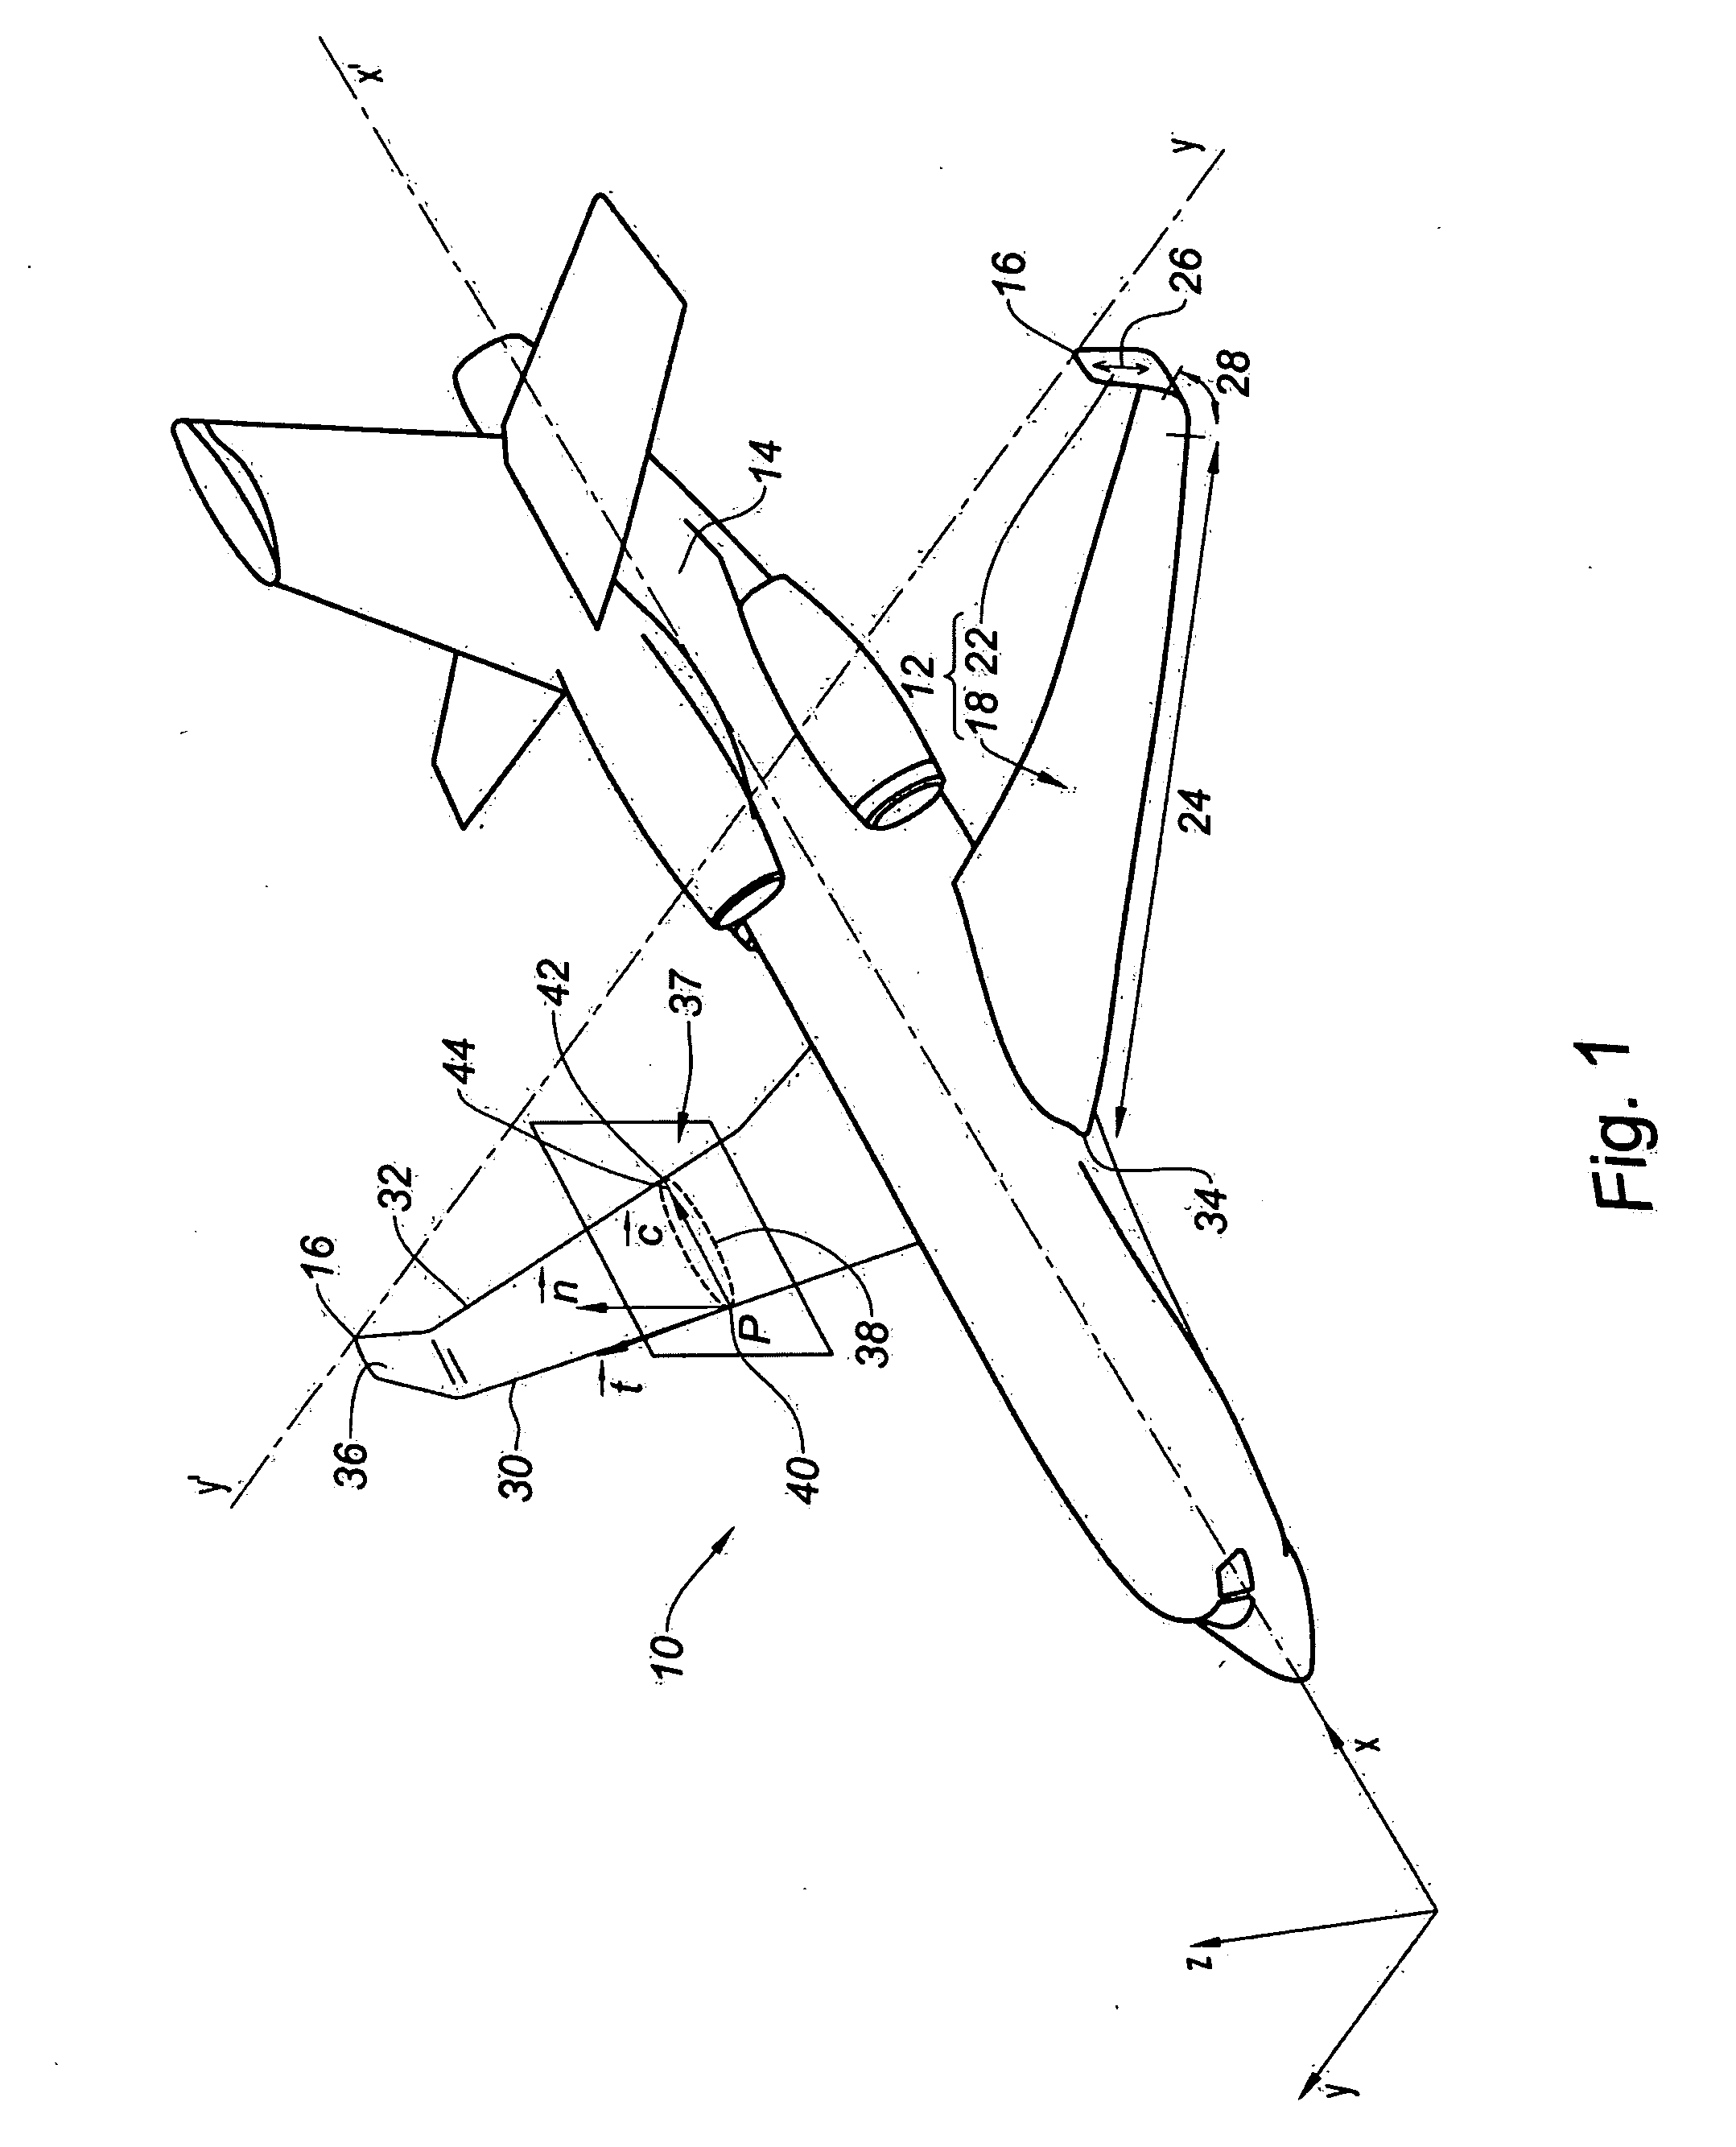 Wing/winglet configuration and aircraft including it